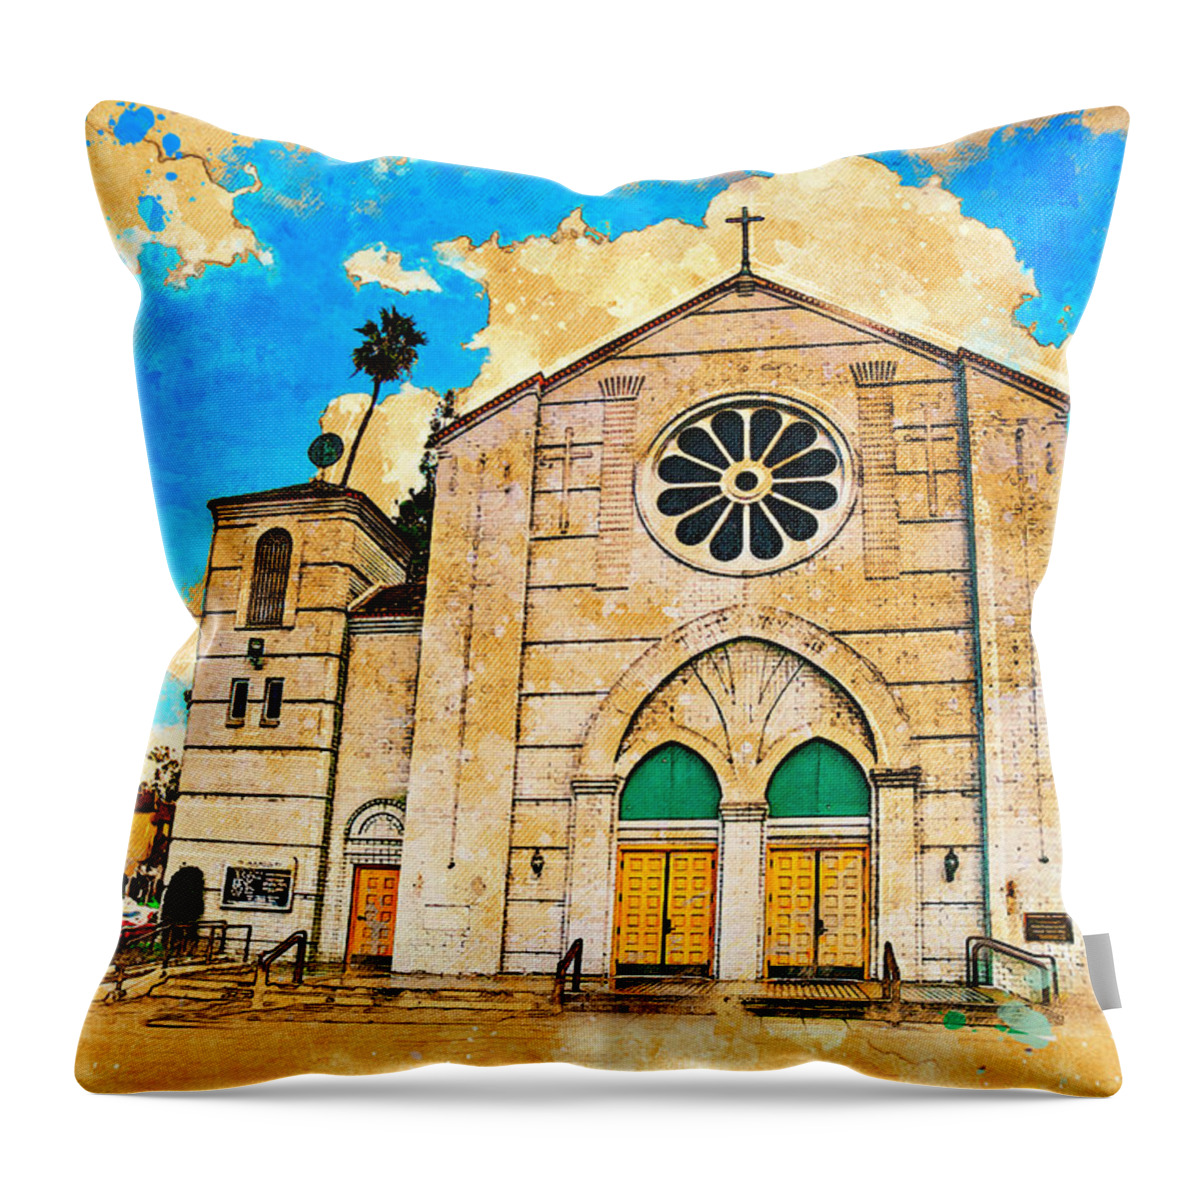 Our Lady Of Perpetual Help Throw Pillow featuring the digital art Our Lady of Perpetual Help catholic church in Downey, California by Nicko Prints